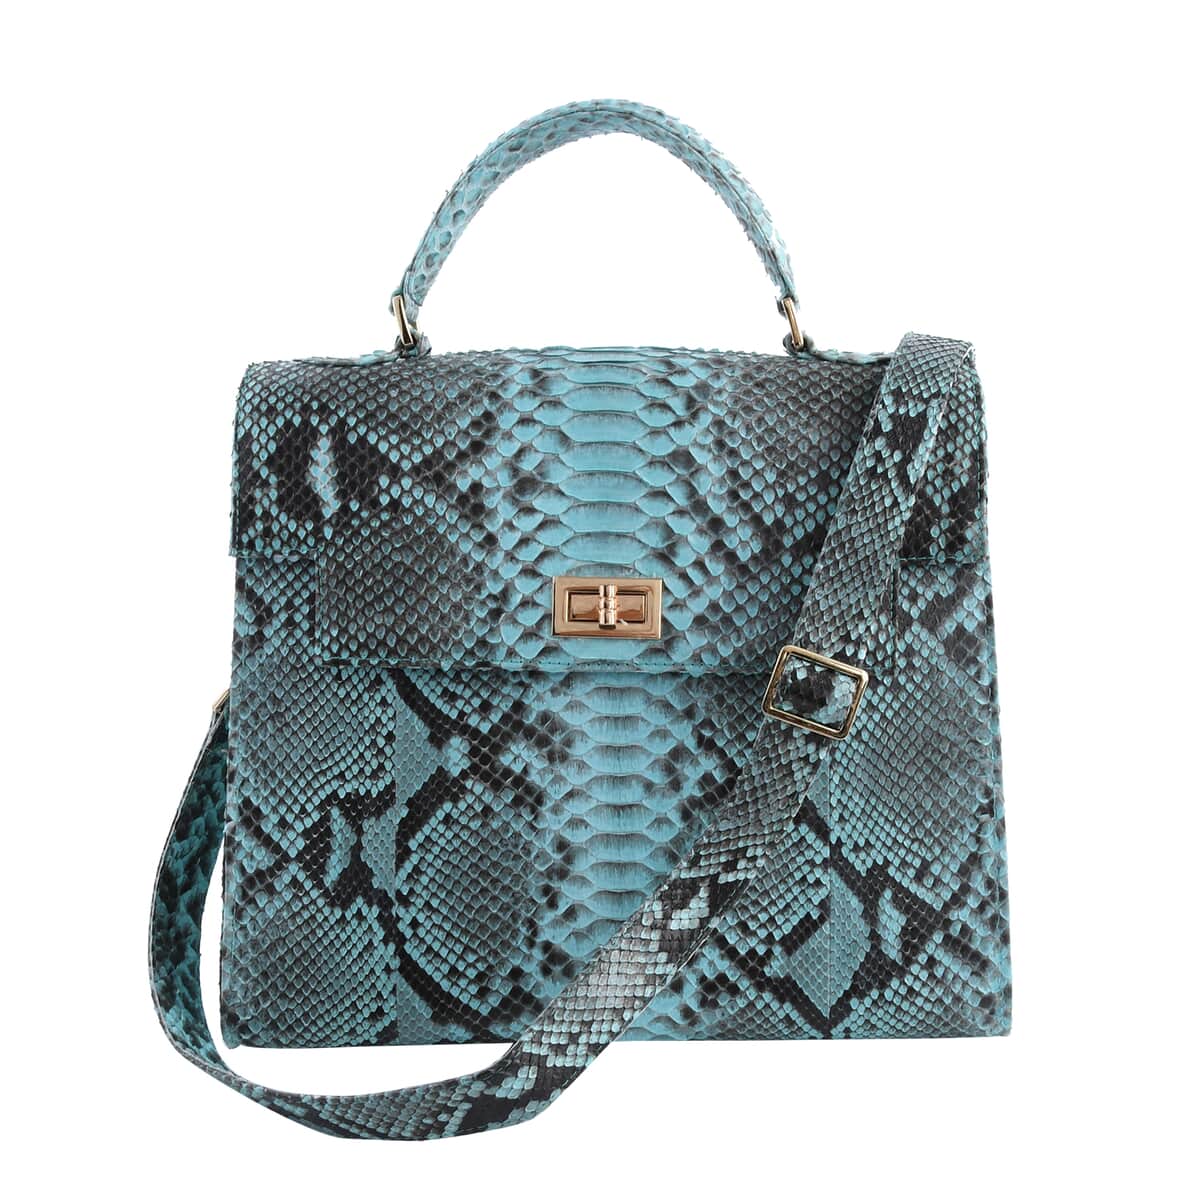 The Pelle Python Skin Bag Collection Blue Turquoise Color 100% Genuine Python Leather Tote Bag image number 0